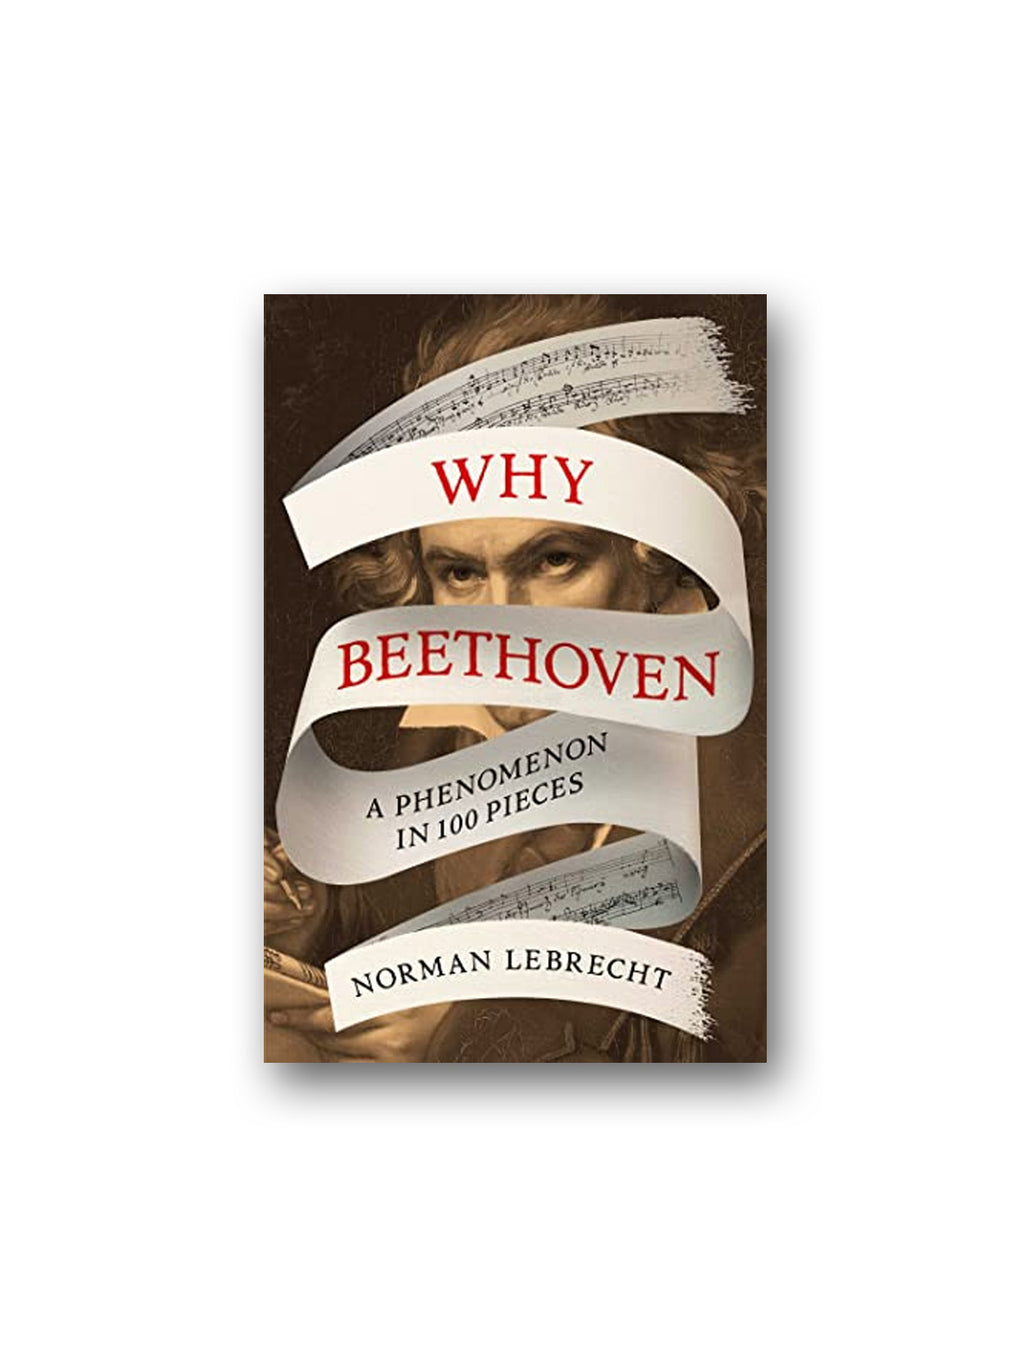 Why Beethoven : A Phenomenon in 100 Pieces